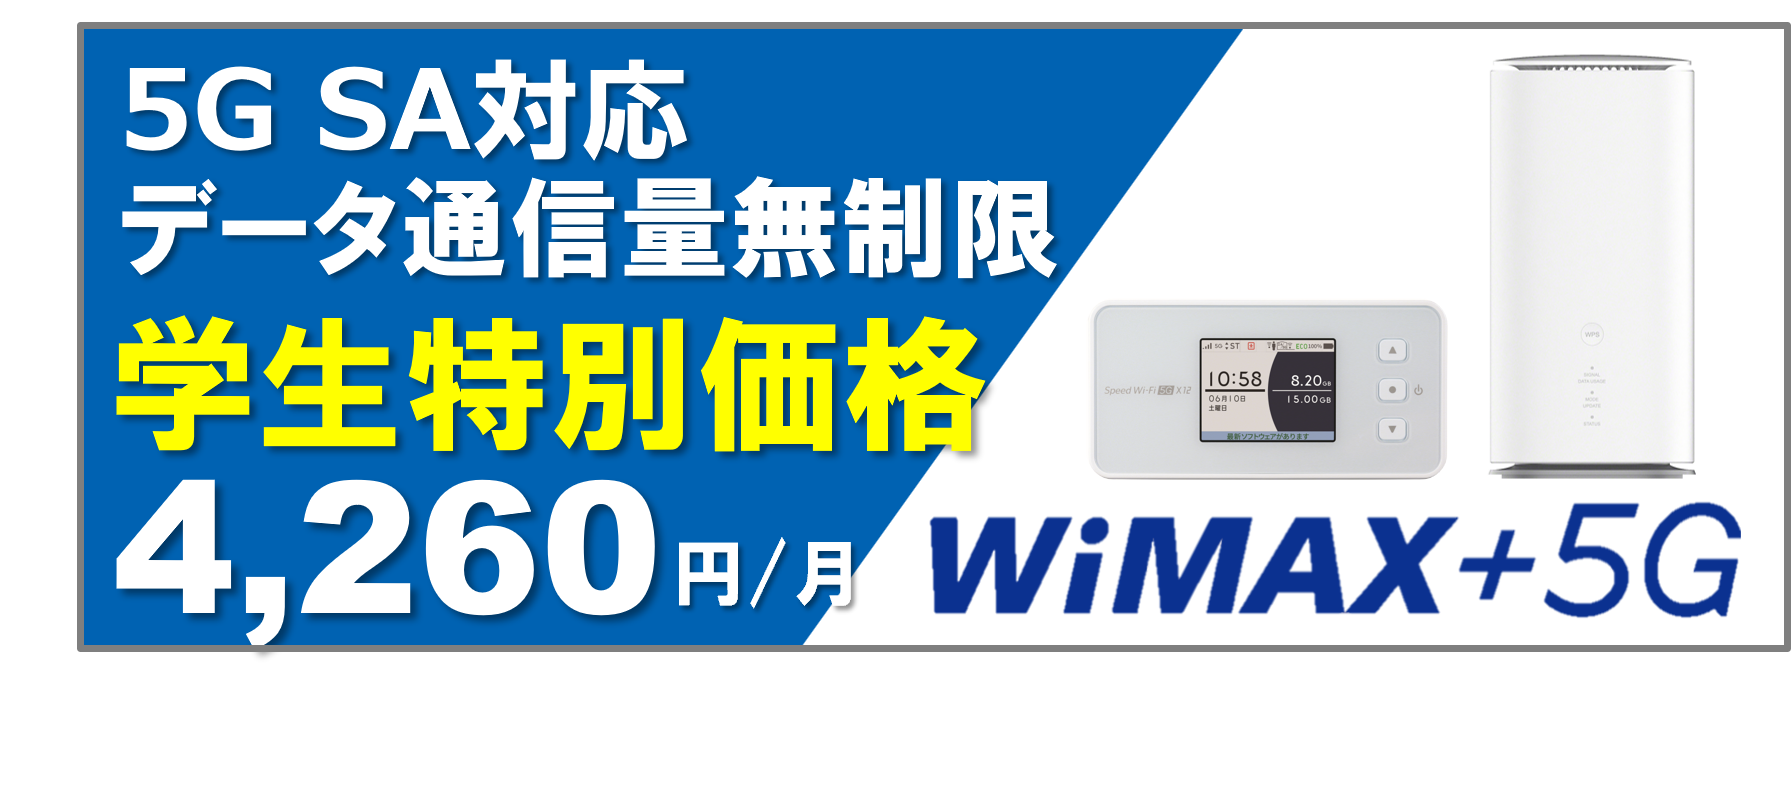 wimax24-001.png